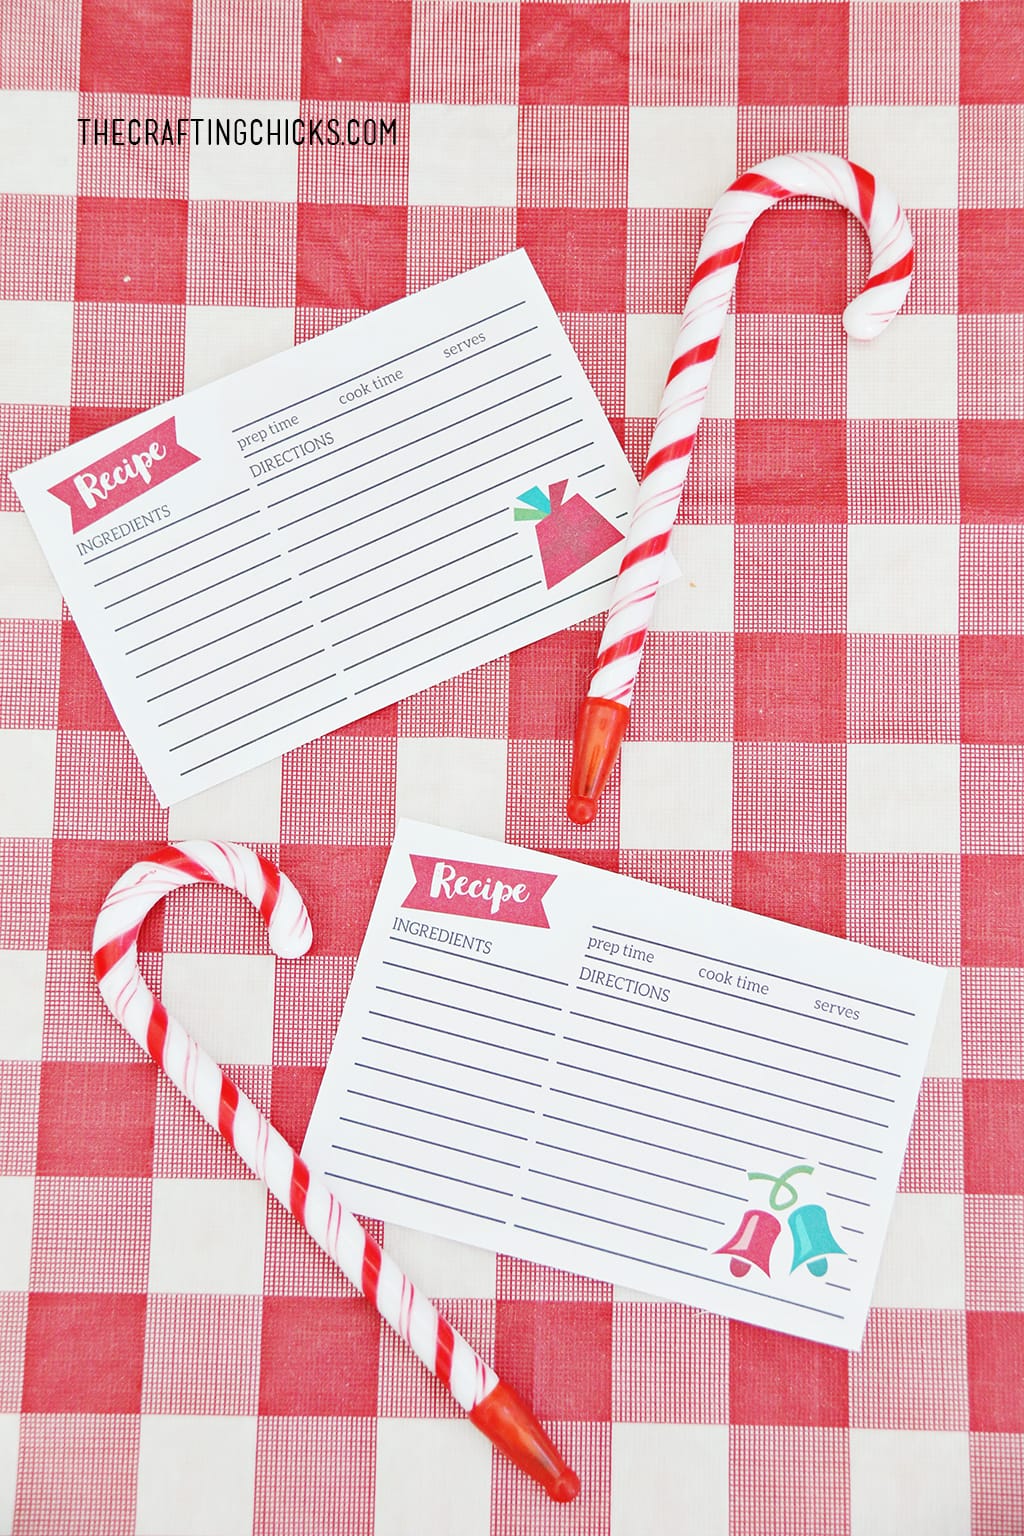 Tween Cookie Exchange Party Recipe Cards are a fun way to show youngsters how to collect fun recipes. Use this along with our DIY Recipe Box for a great party idea.